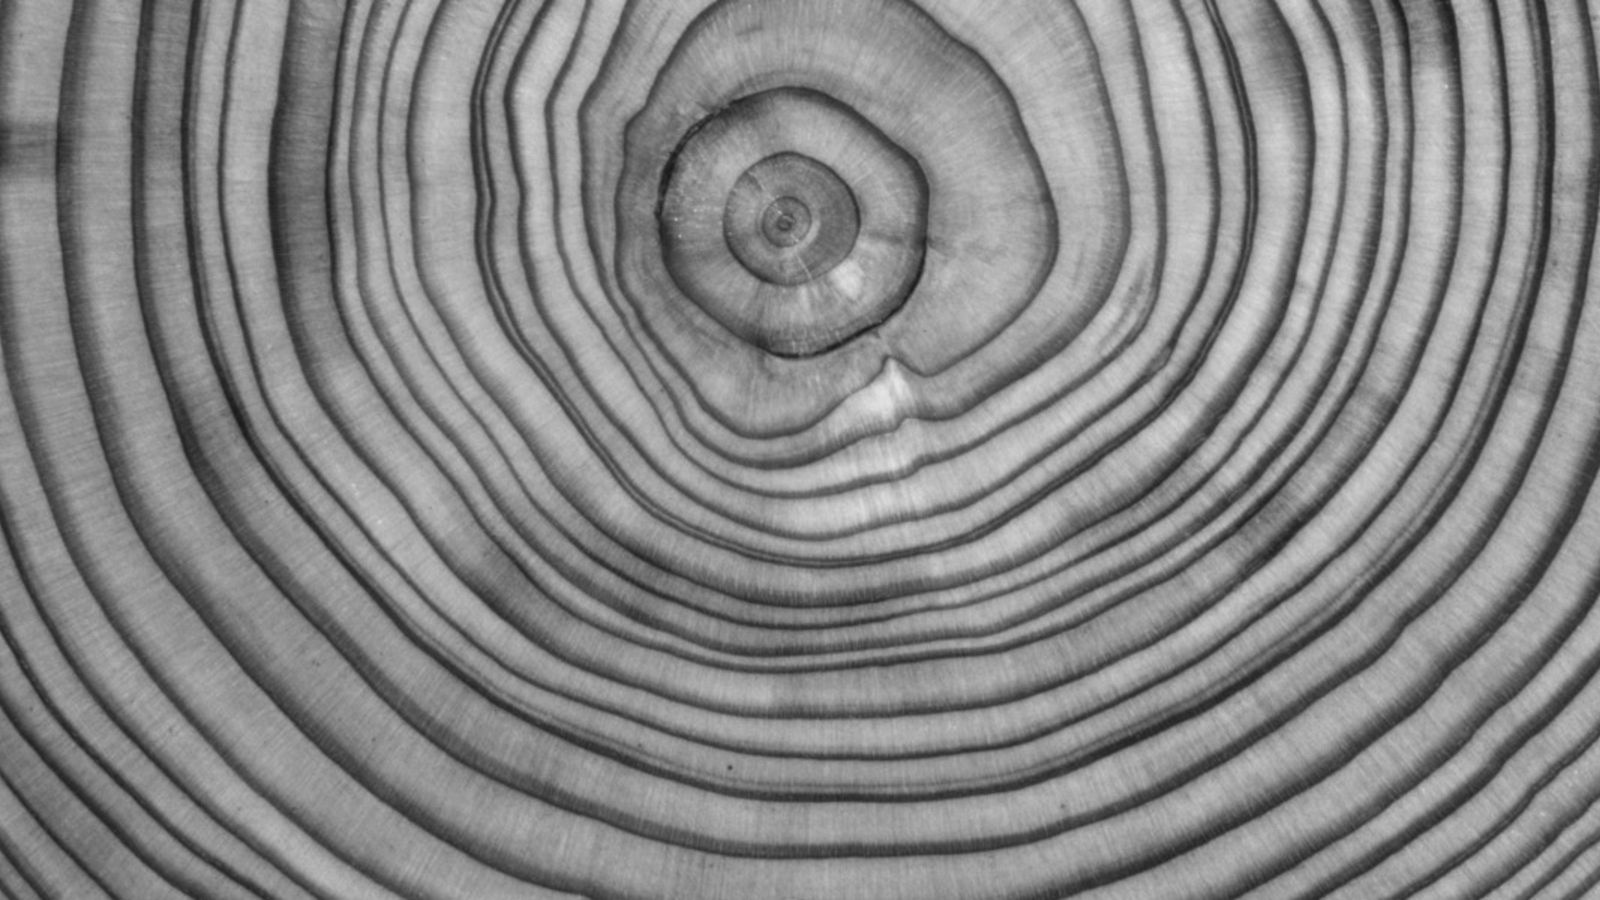 Black and white image of age rings on sliced tree trunk